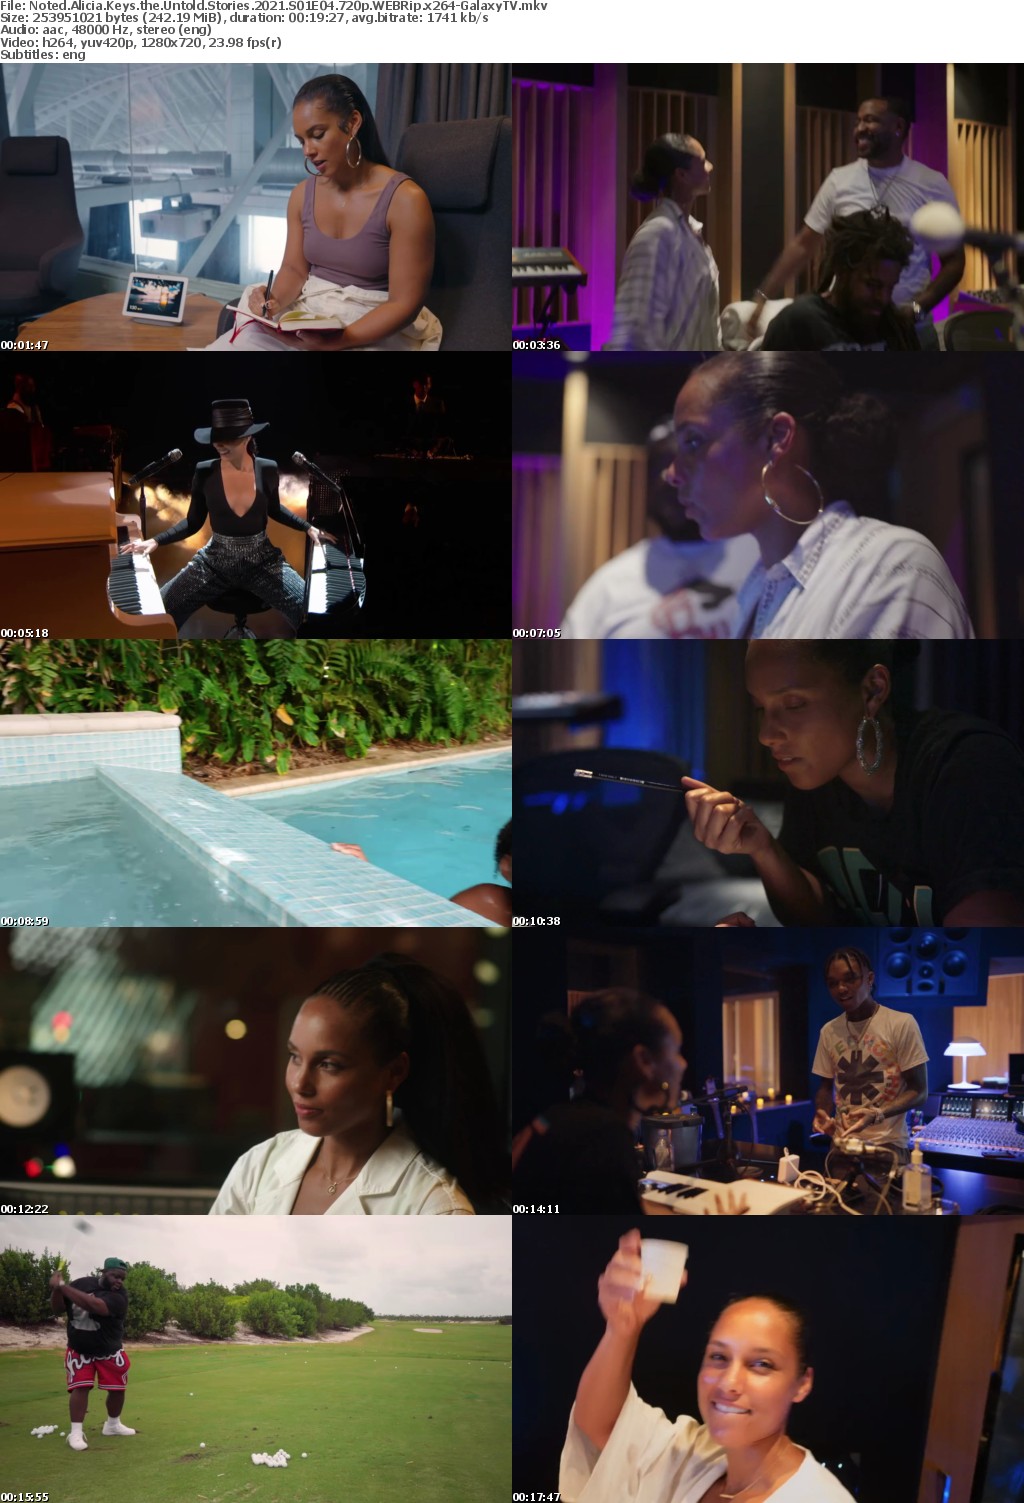 Noted Alicia Keys the Untold Stories 2021 S01 COMPLETE 720p WEBRip x264-GalaxyTV